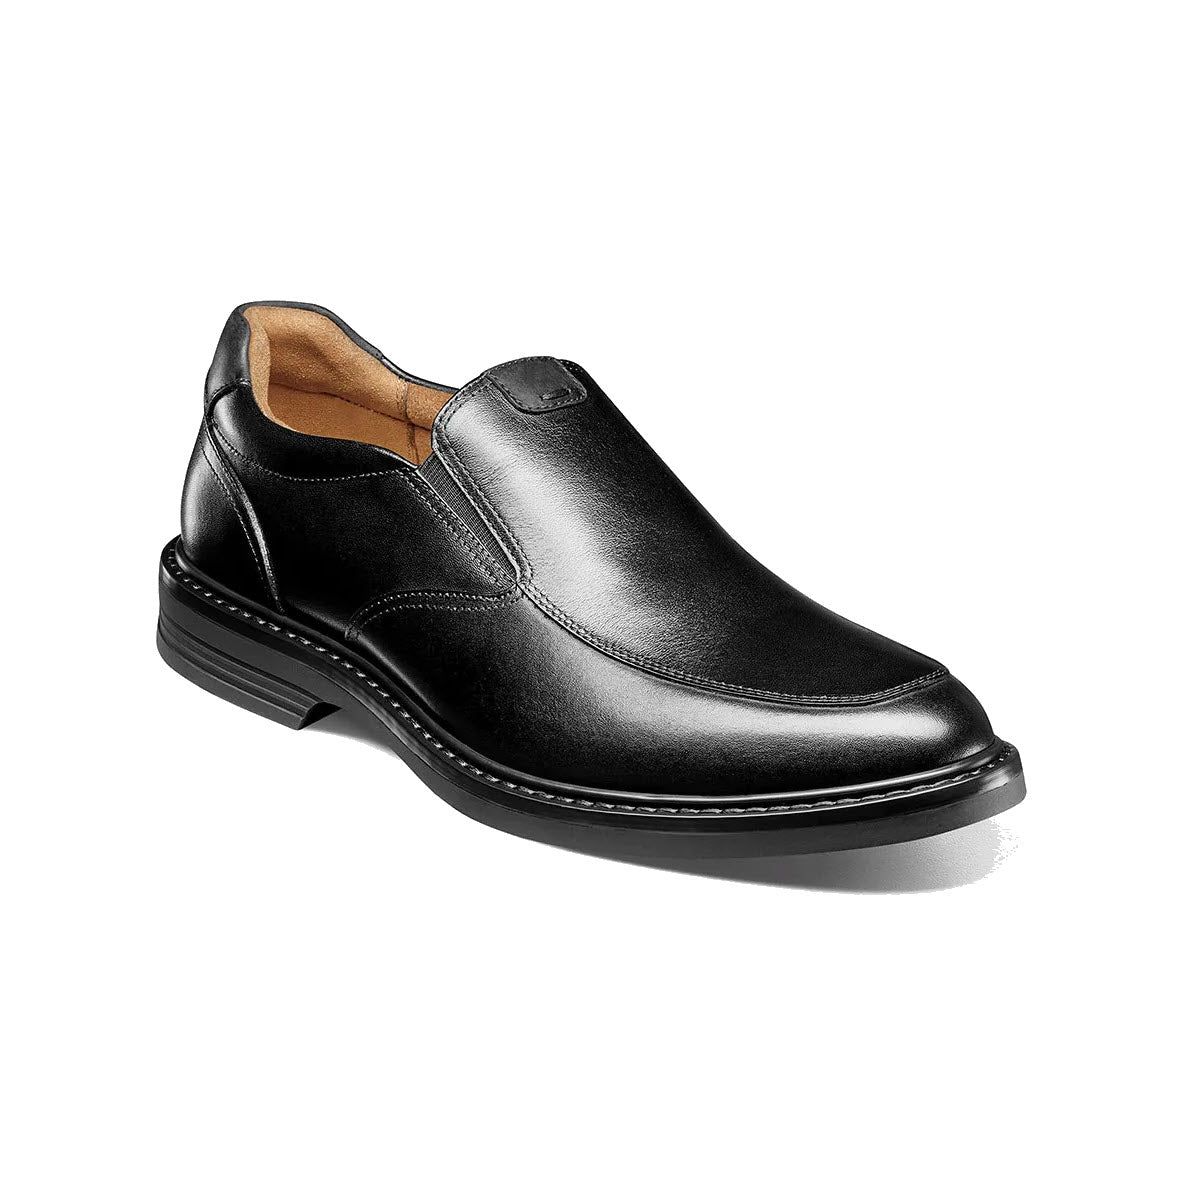 Black leather men&#39;s Florsheim Norwalk moc toe slip-on dress shoe with a square toe and elastic side panels on a white background.